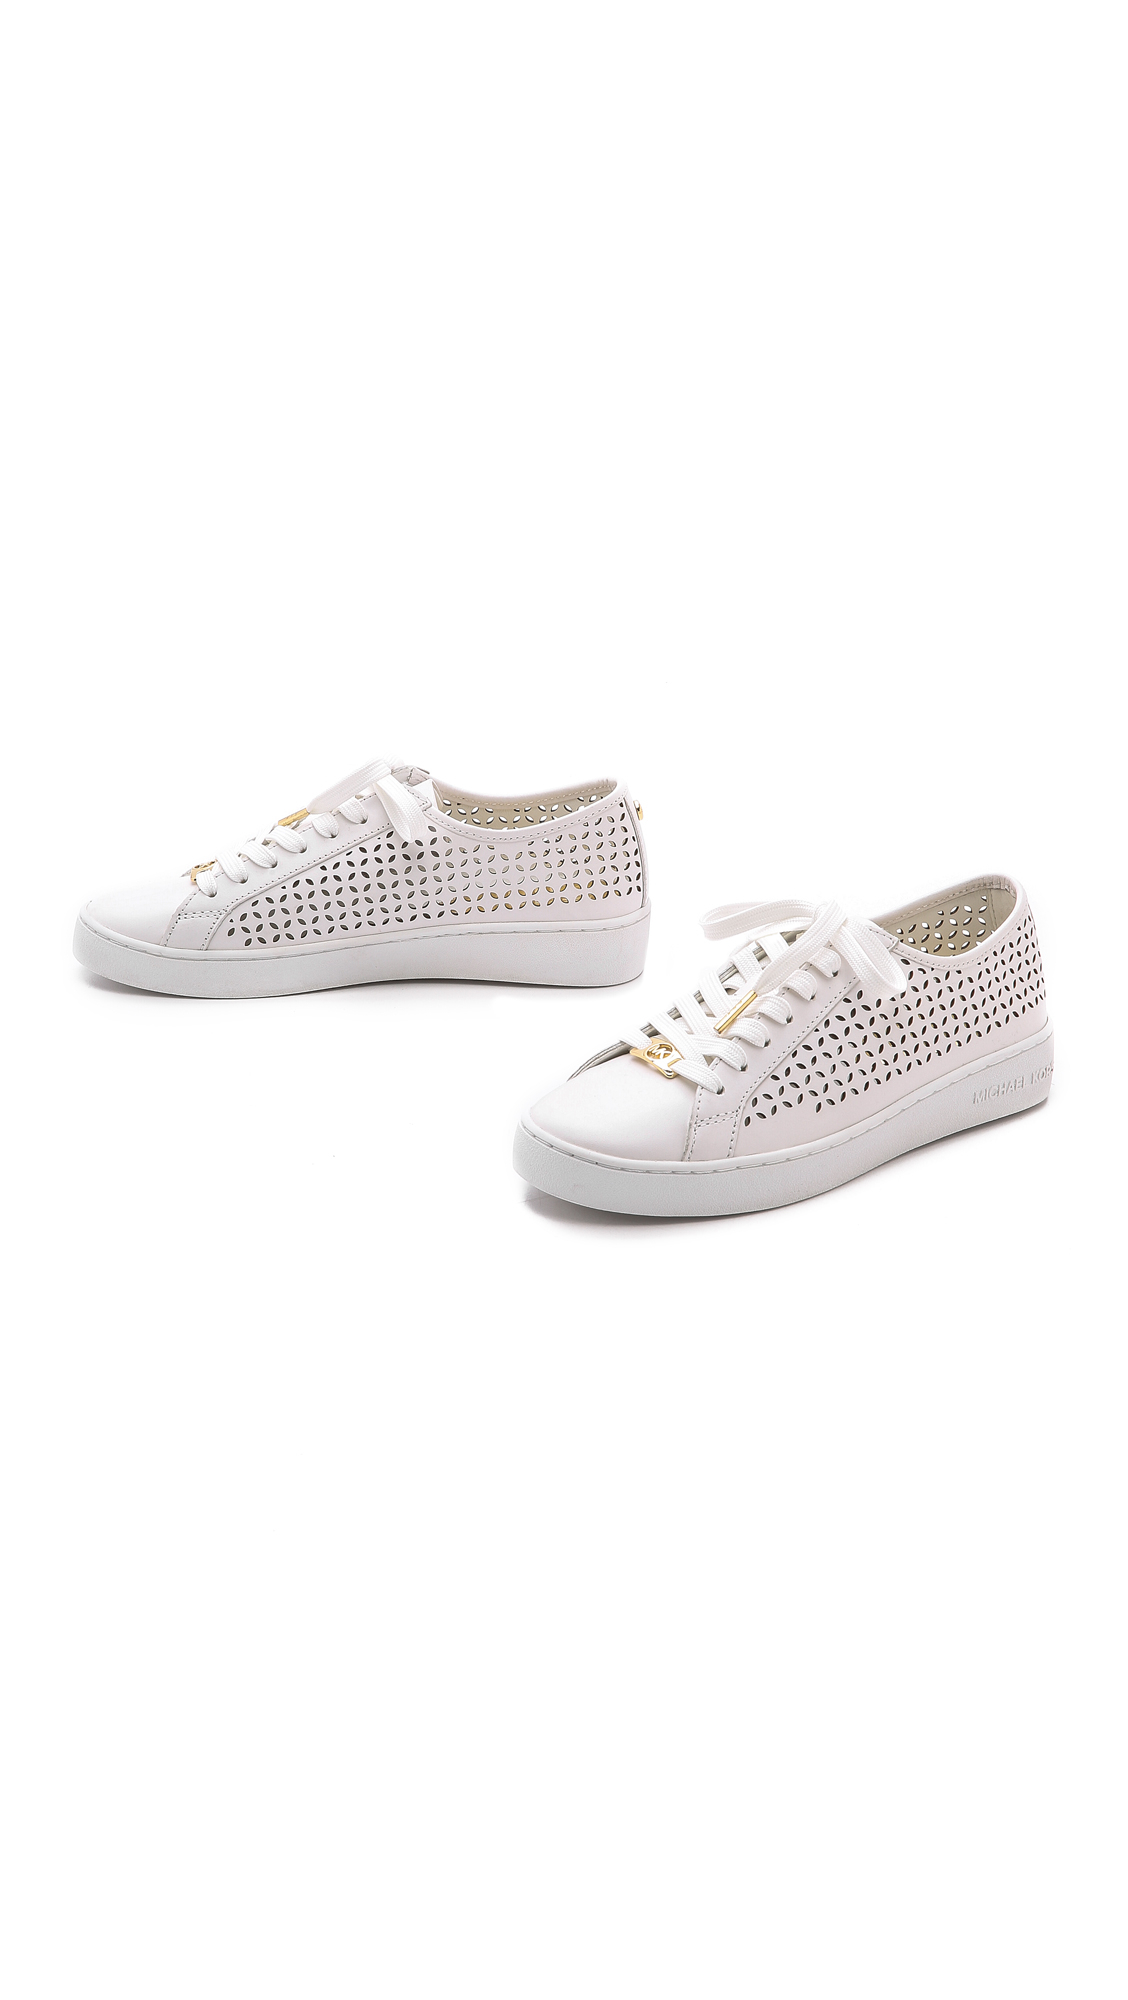 MICHAEL Michael Kors Olivia Lace Up Sneakers - Optic White | Lyst